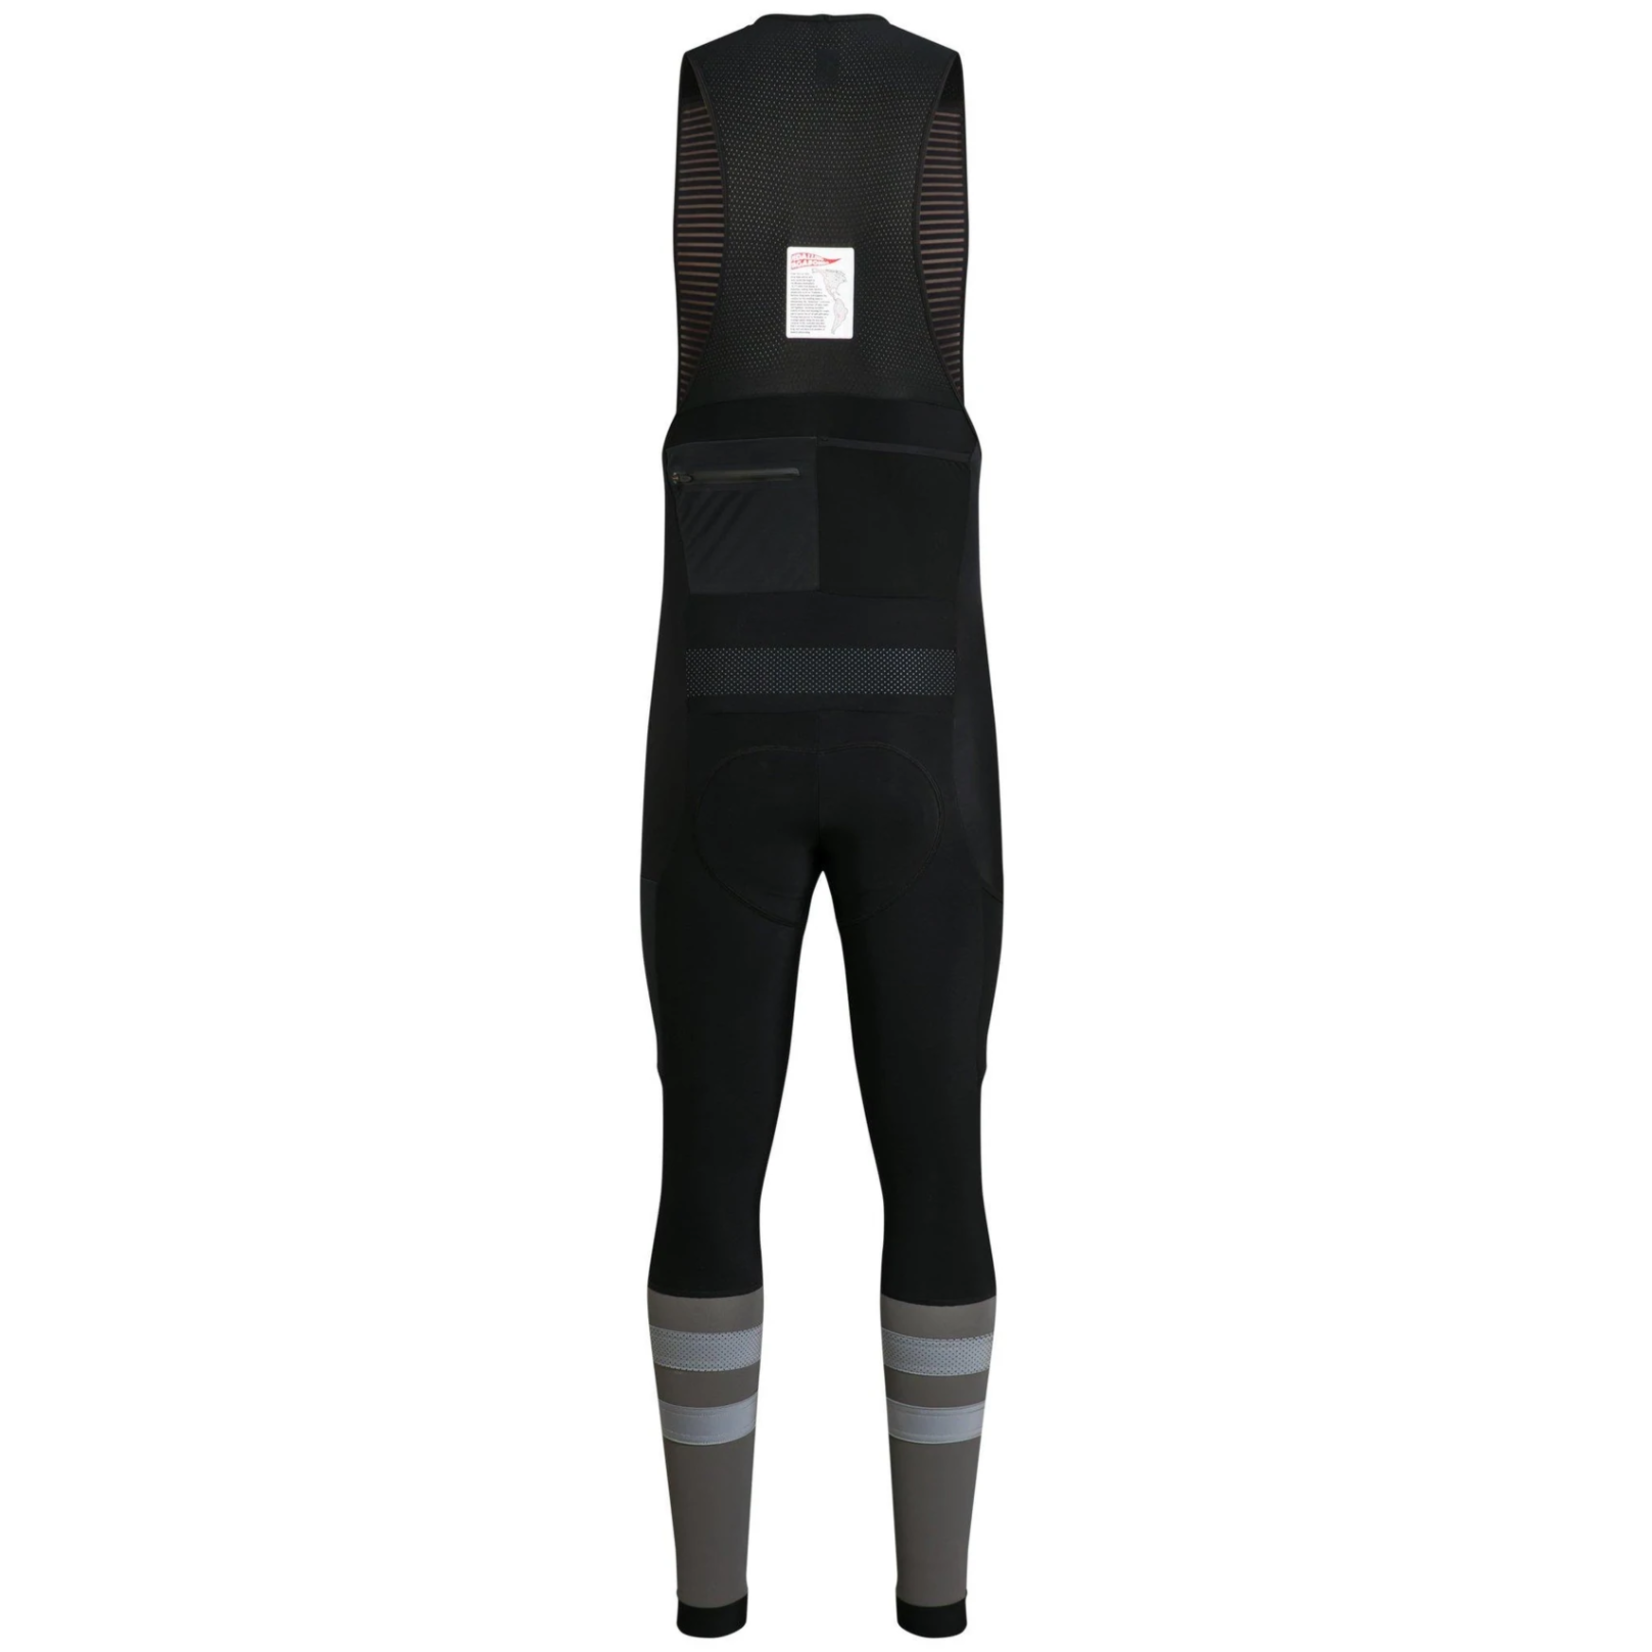 Rapha Cargo Winter tights with pad